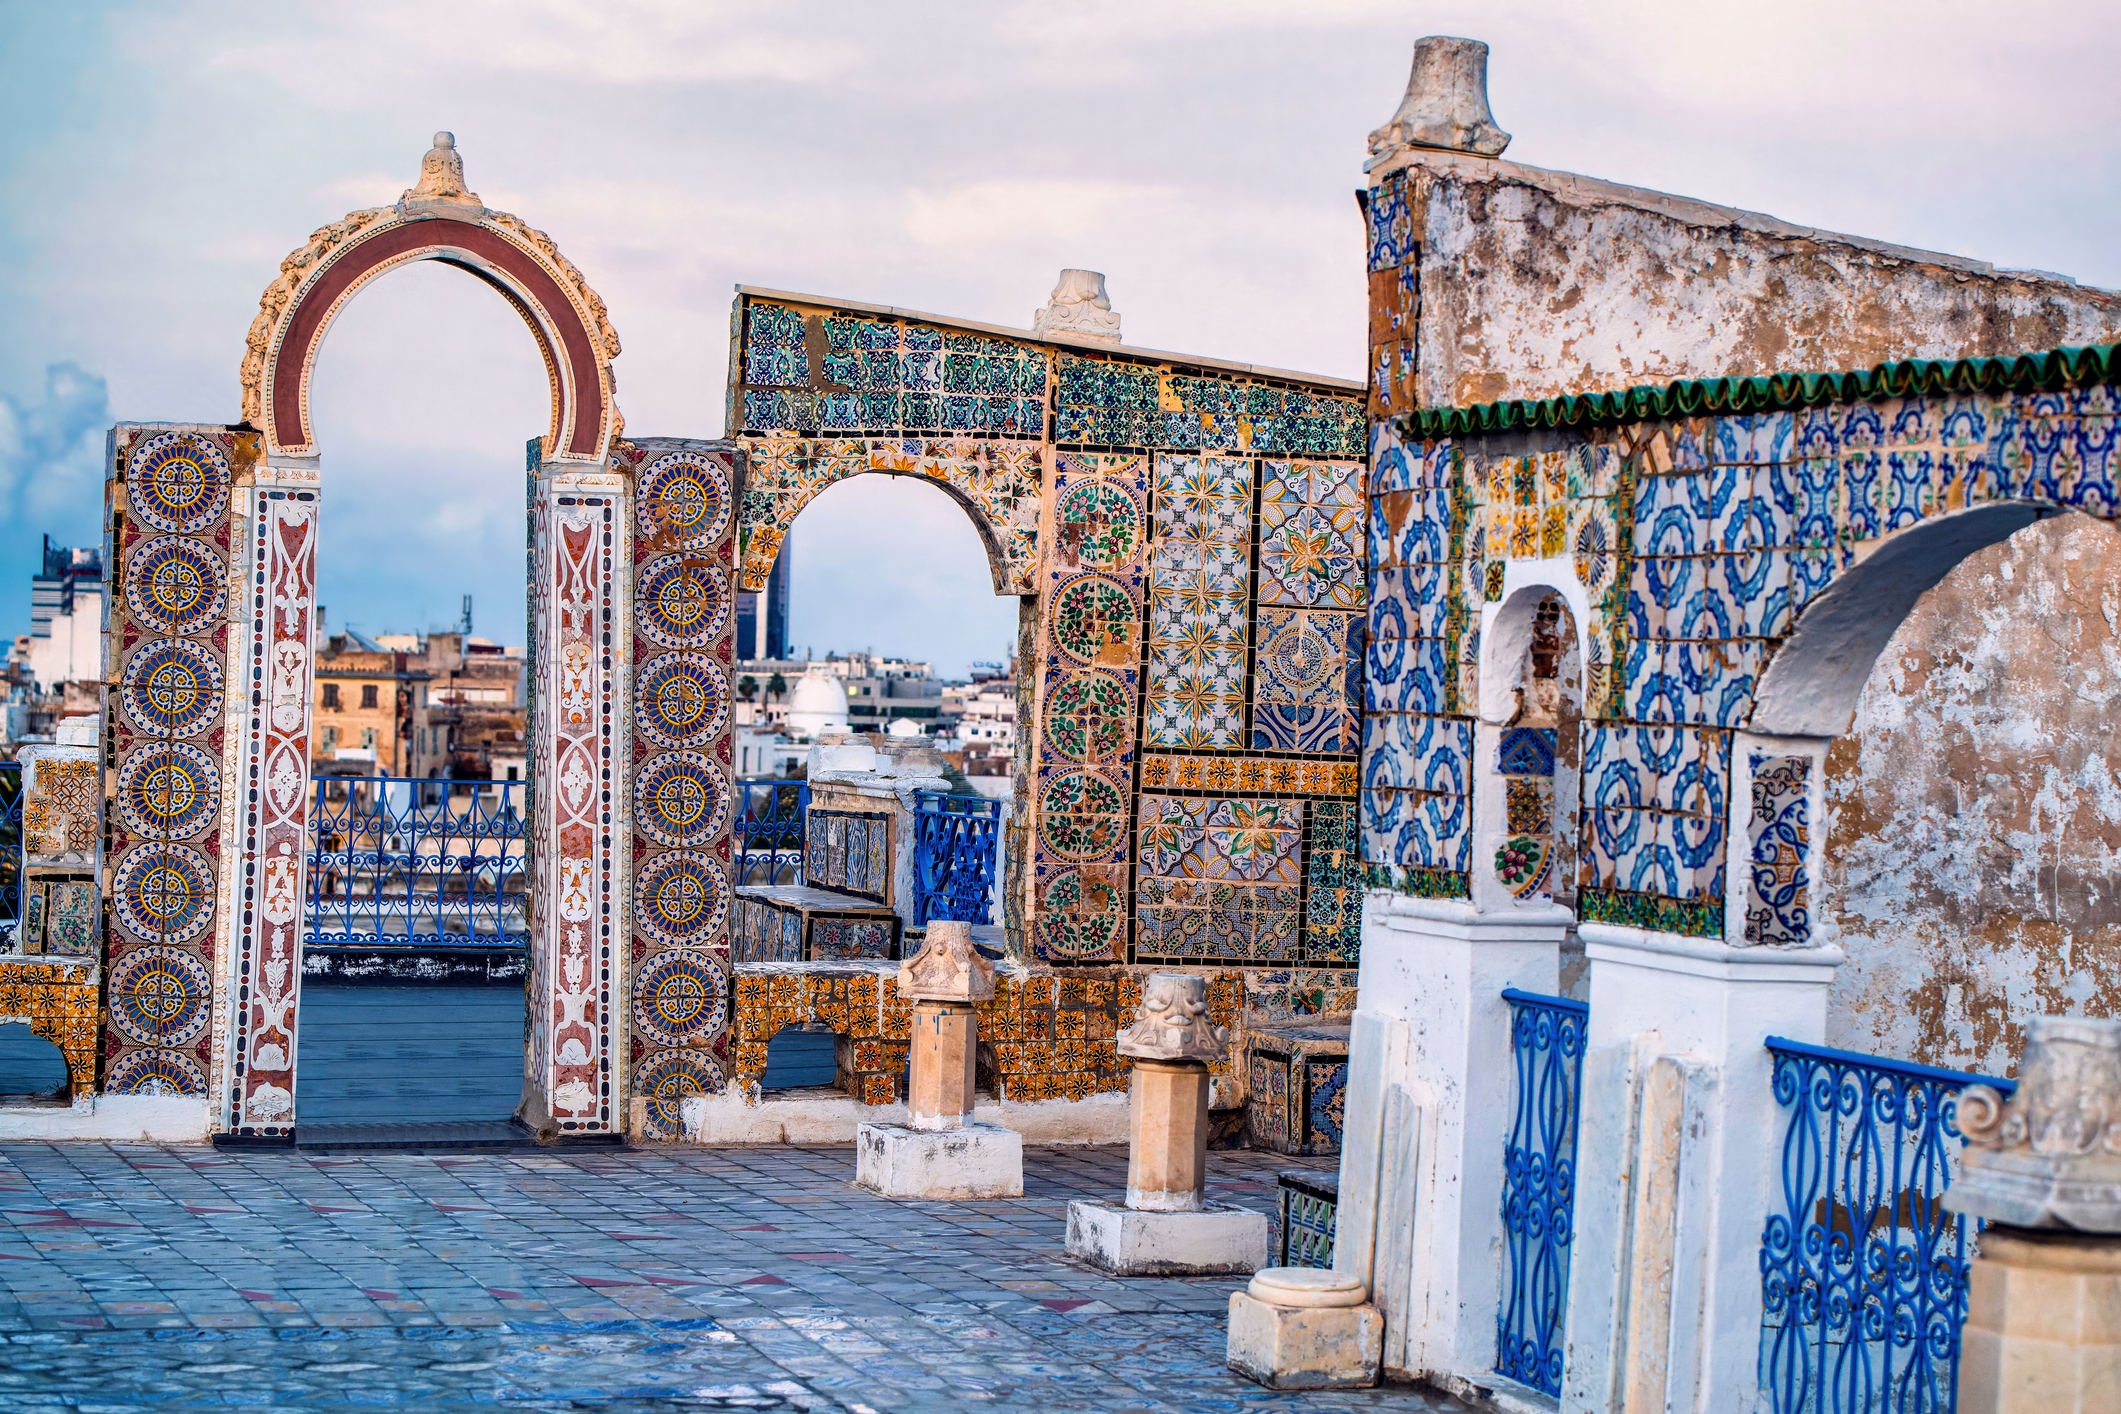 Rooftop view with ornate mosaic archways overlooking a cityscape at dusk